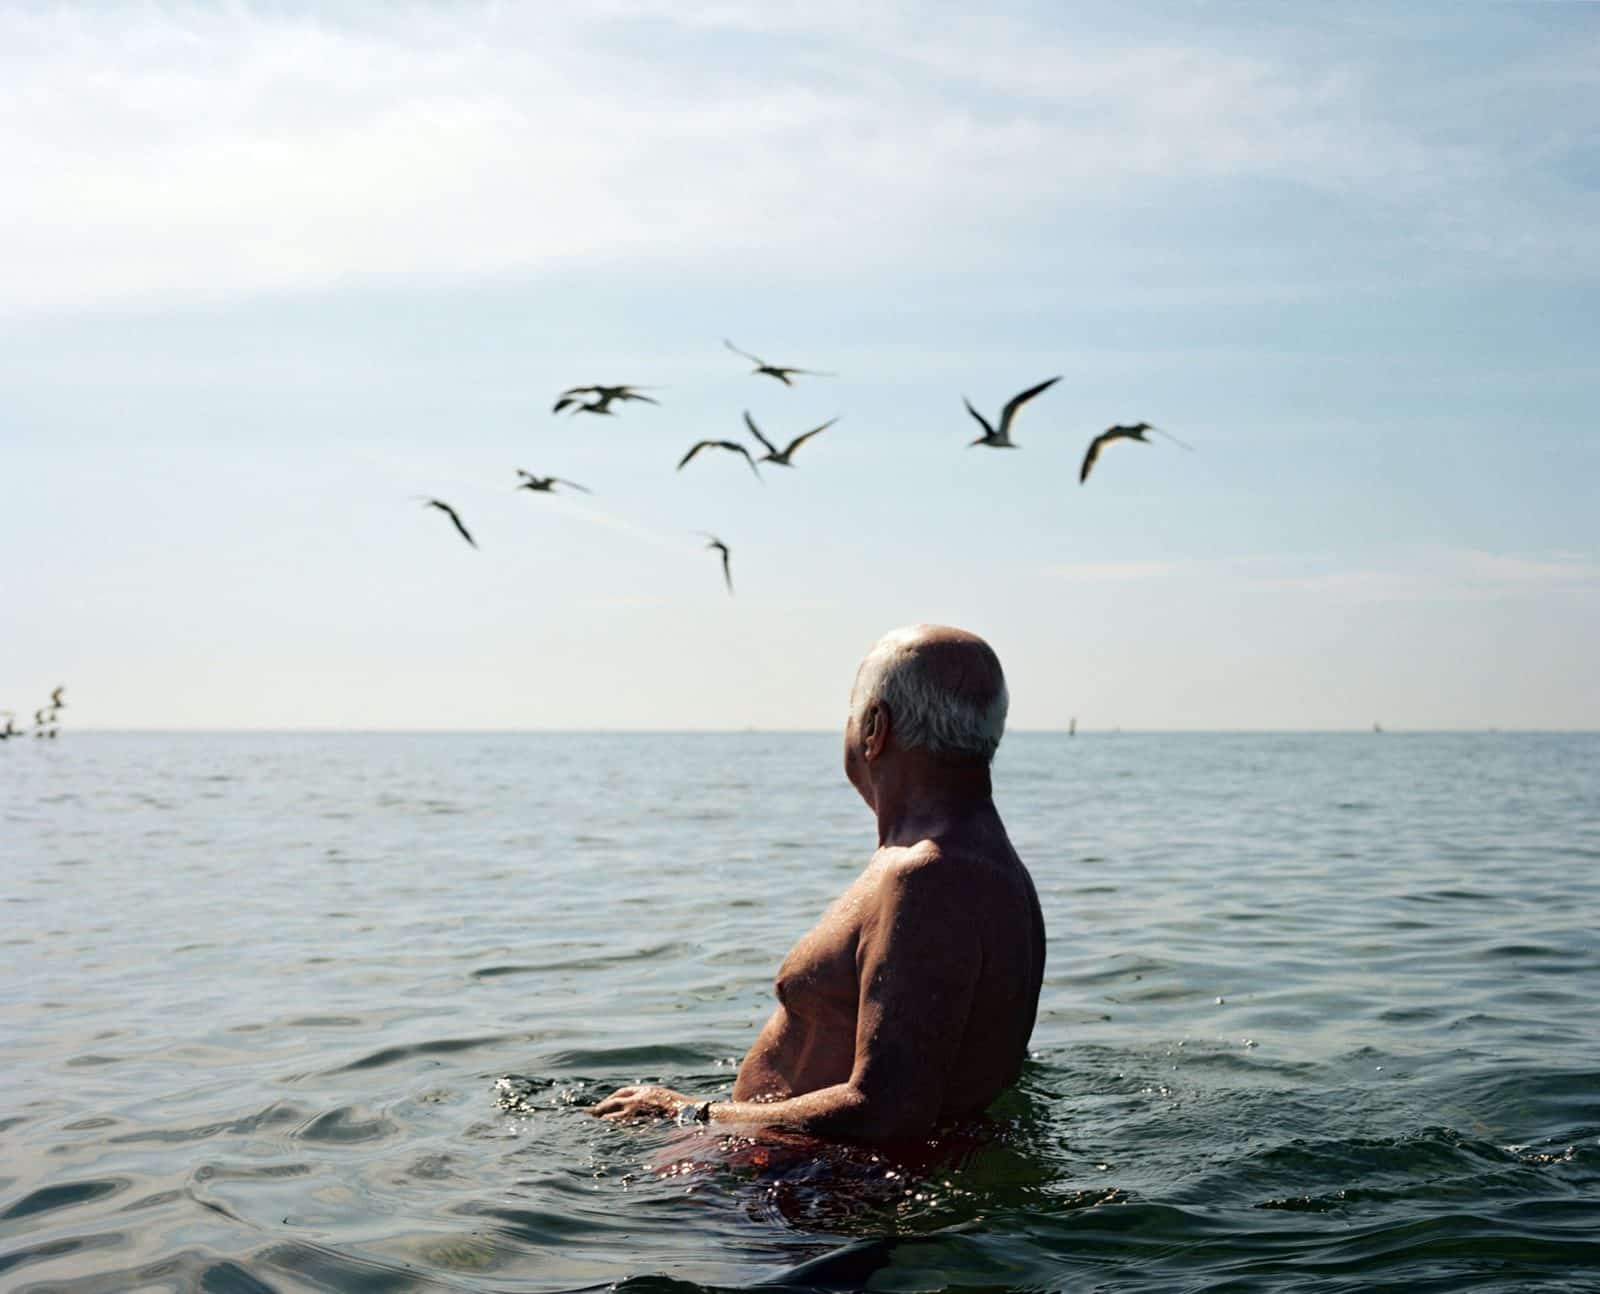 A man half-submerged in the ocean, with seagulls in the background